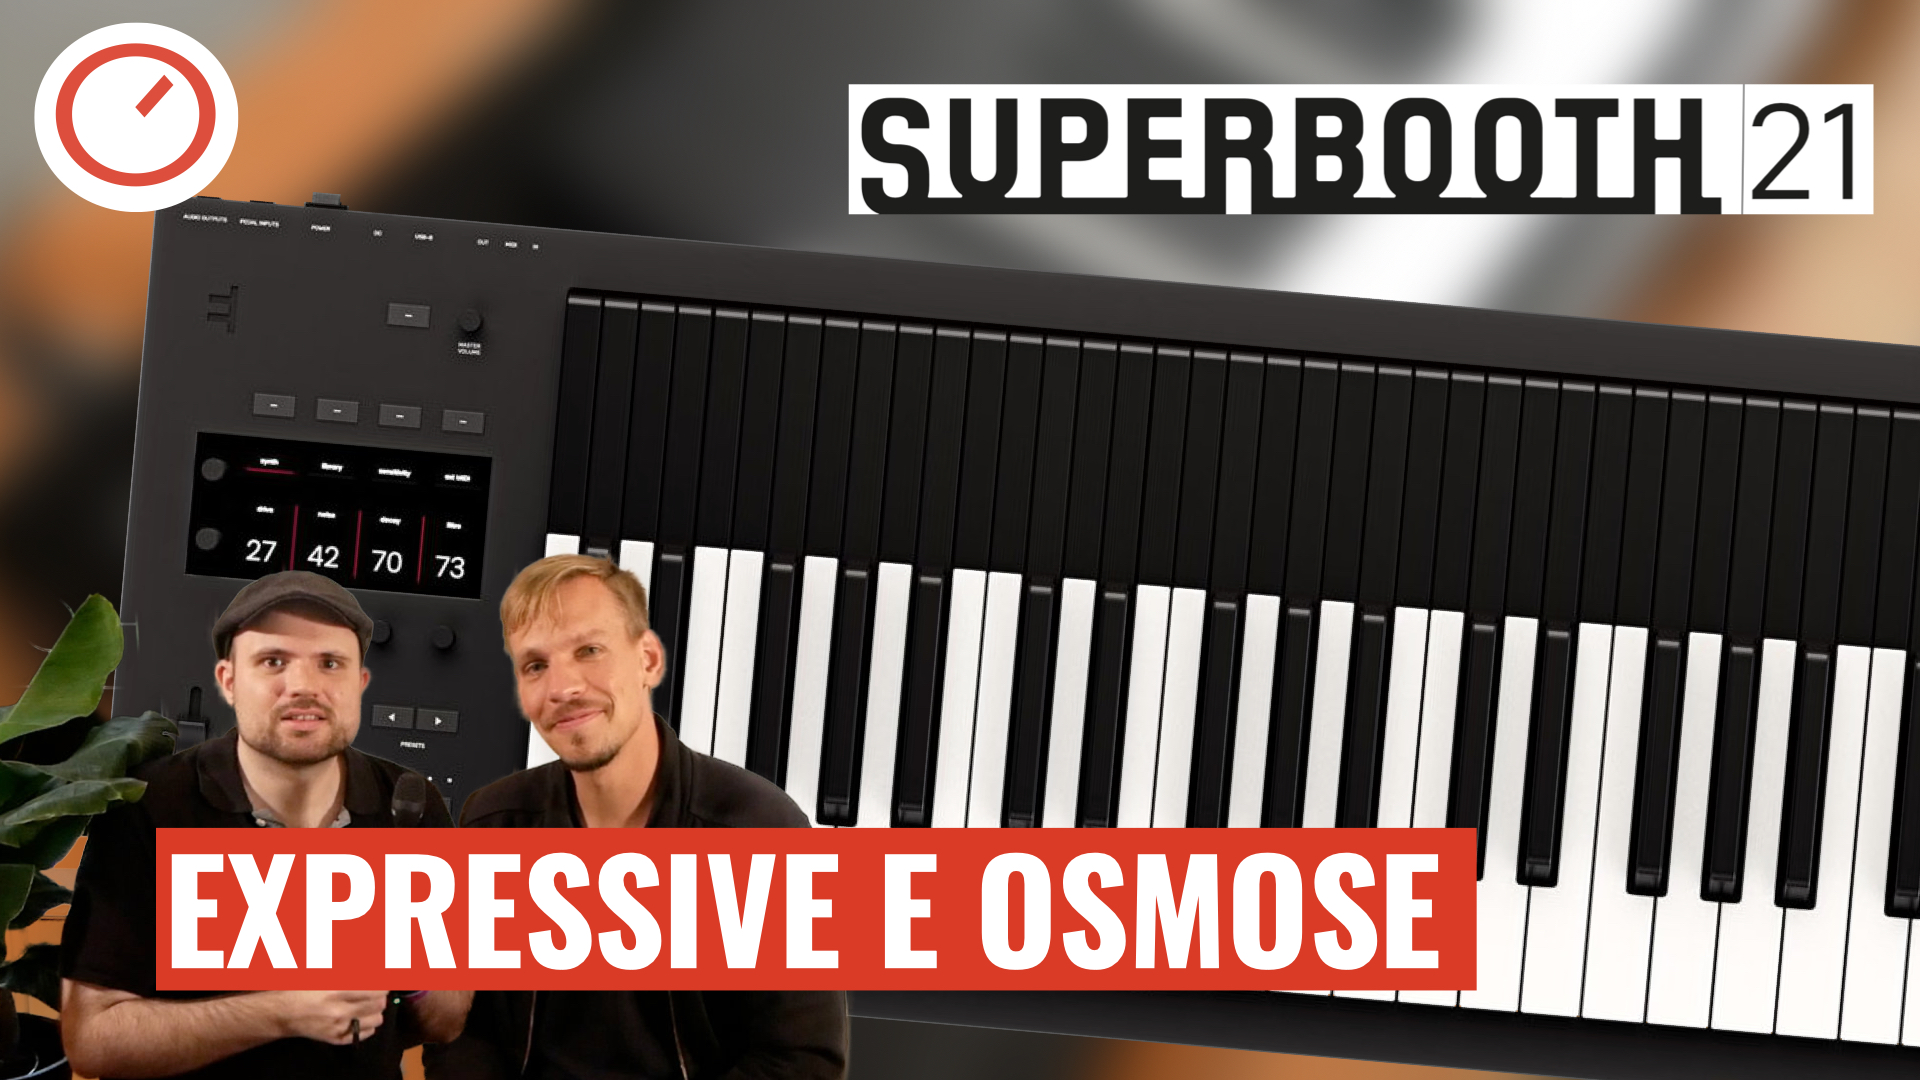 mave helikopter opskrift SYNTH ANATOMY on Twitter: "Here is my loooong first look at the Expressive  E Osmose https://t.co/HgYSU3cu21 #synthesizer #expressivee #osmose  #synthesizer #synthanatomy #superbooth21 #superbooth2021  https://t.co/8FhTSXhfiX" / Twitter